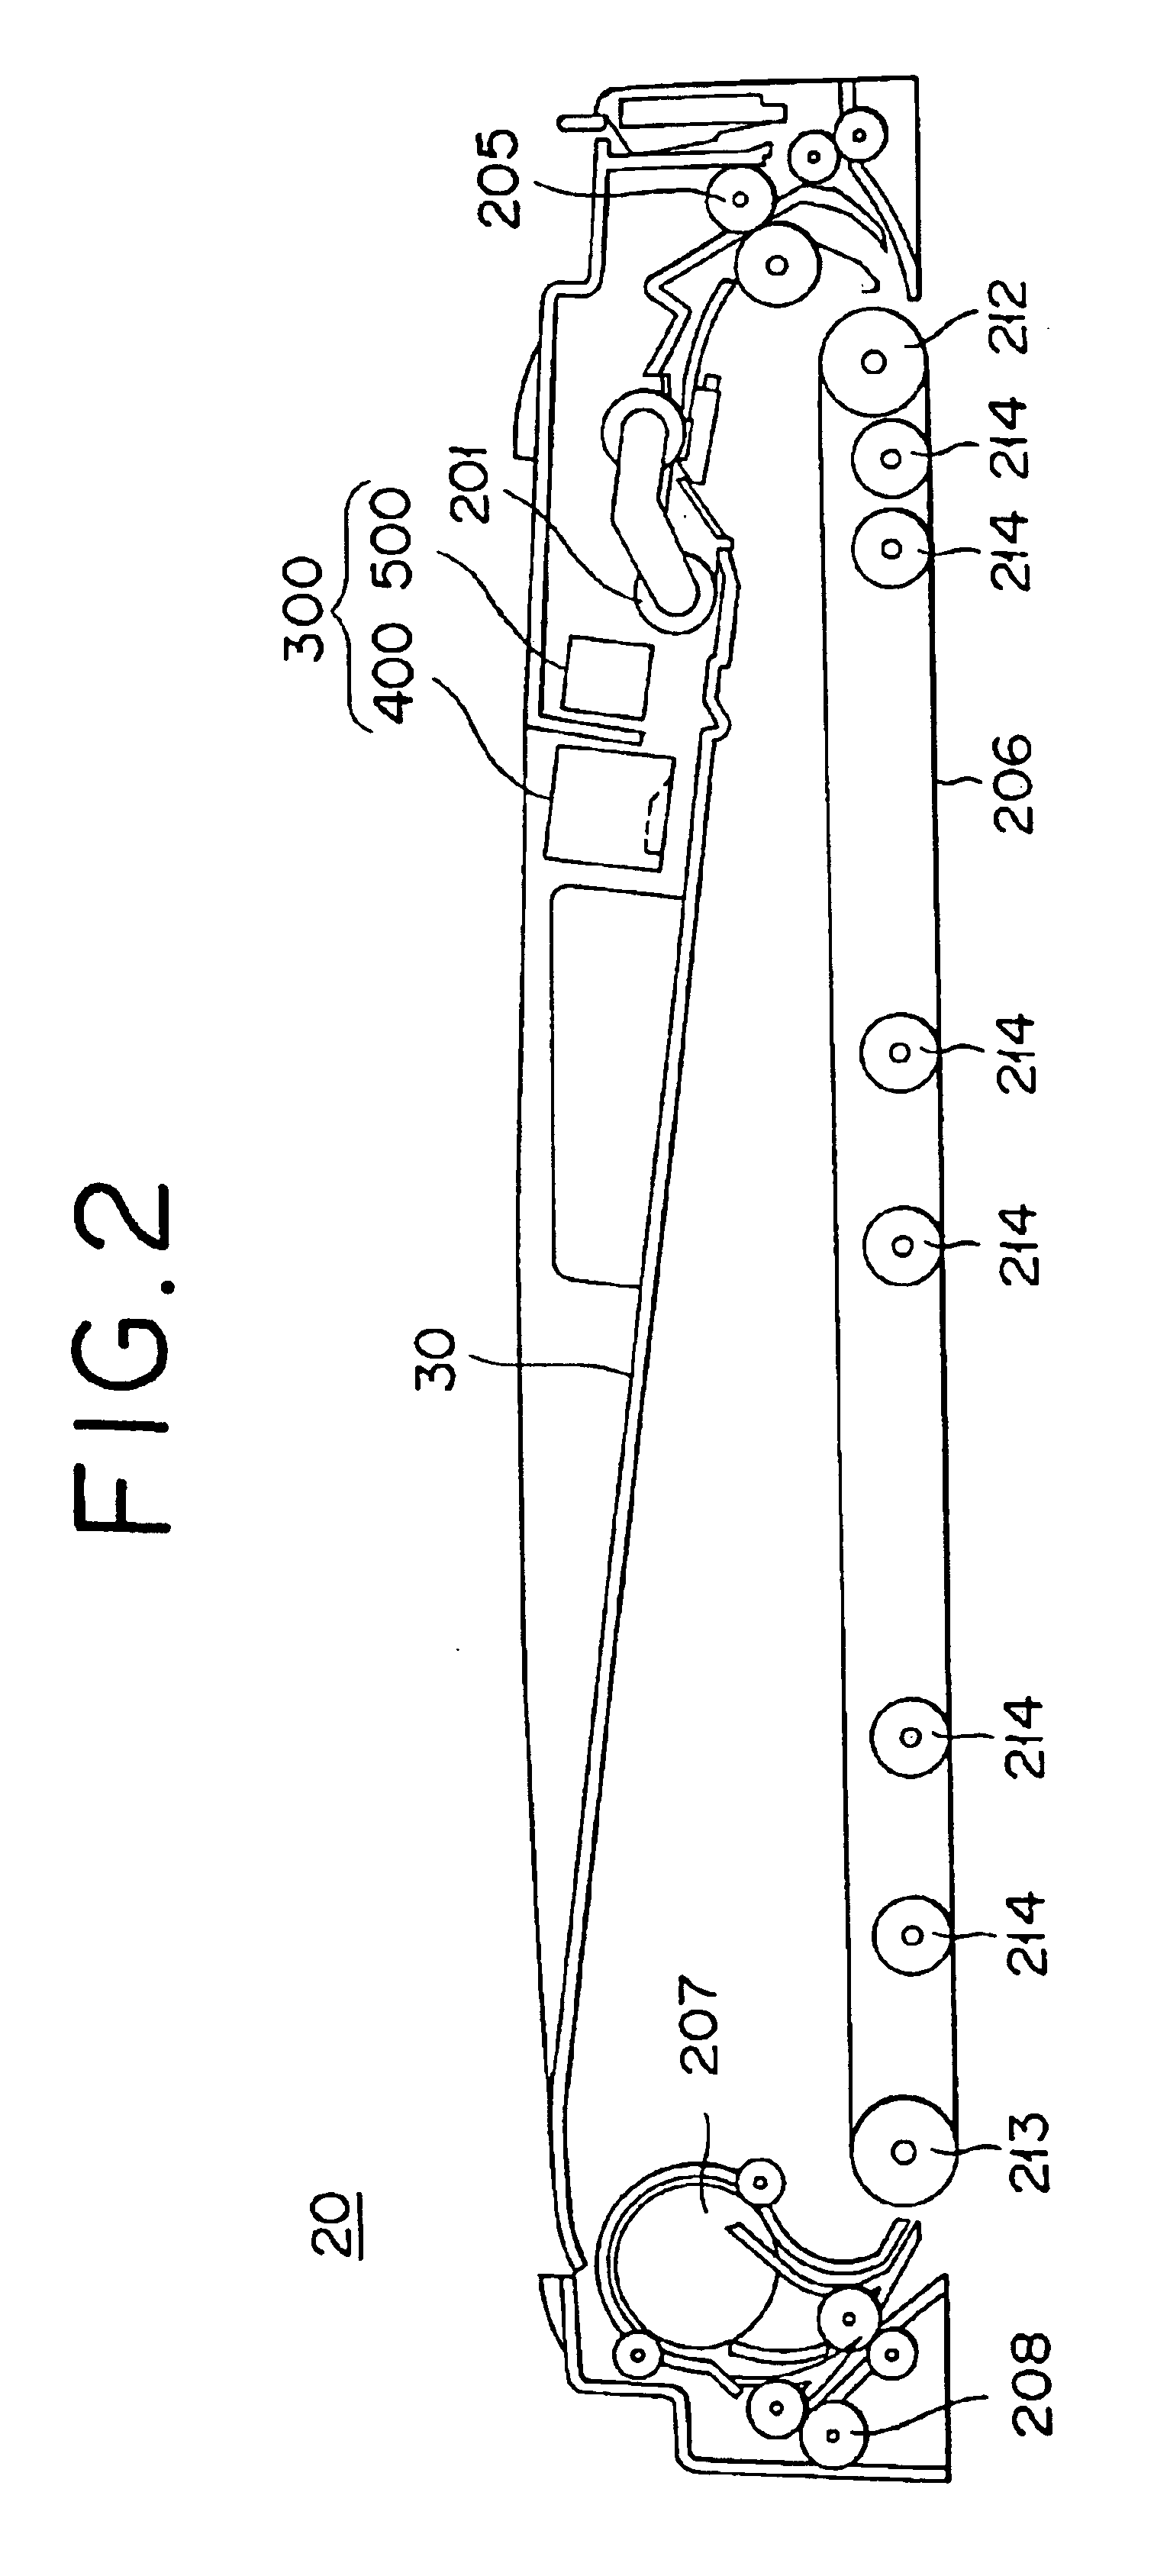 Binding member removing apparatus, automatic document feeder, sheet processing apparatus, and image forming apparatus